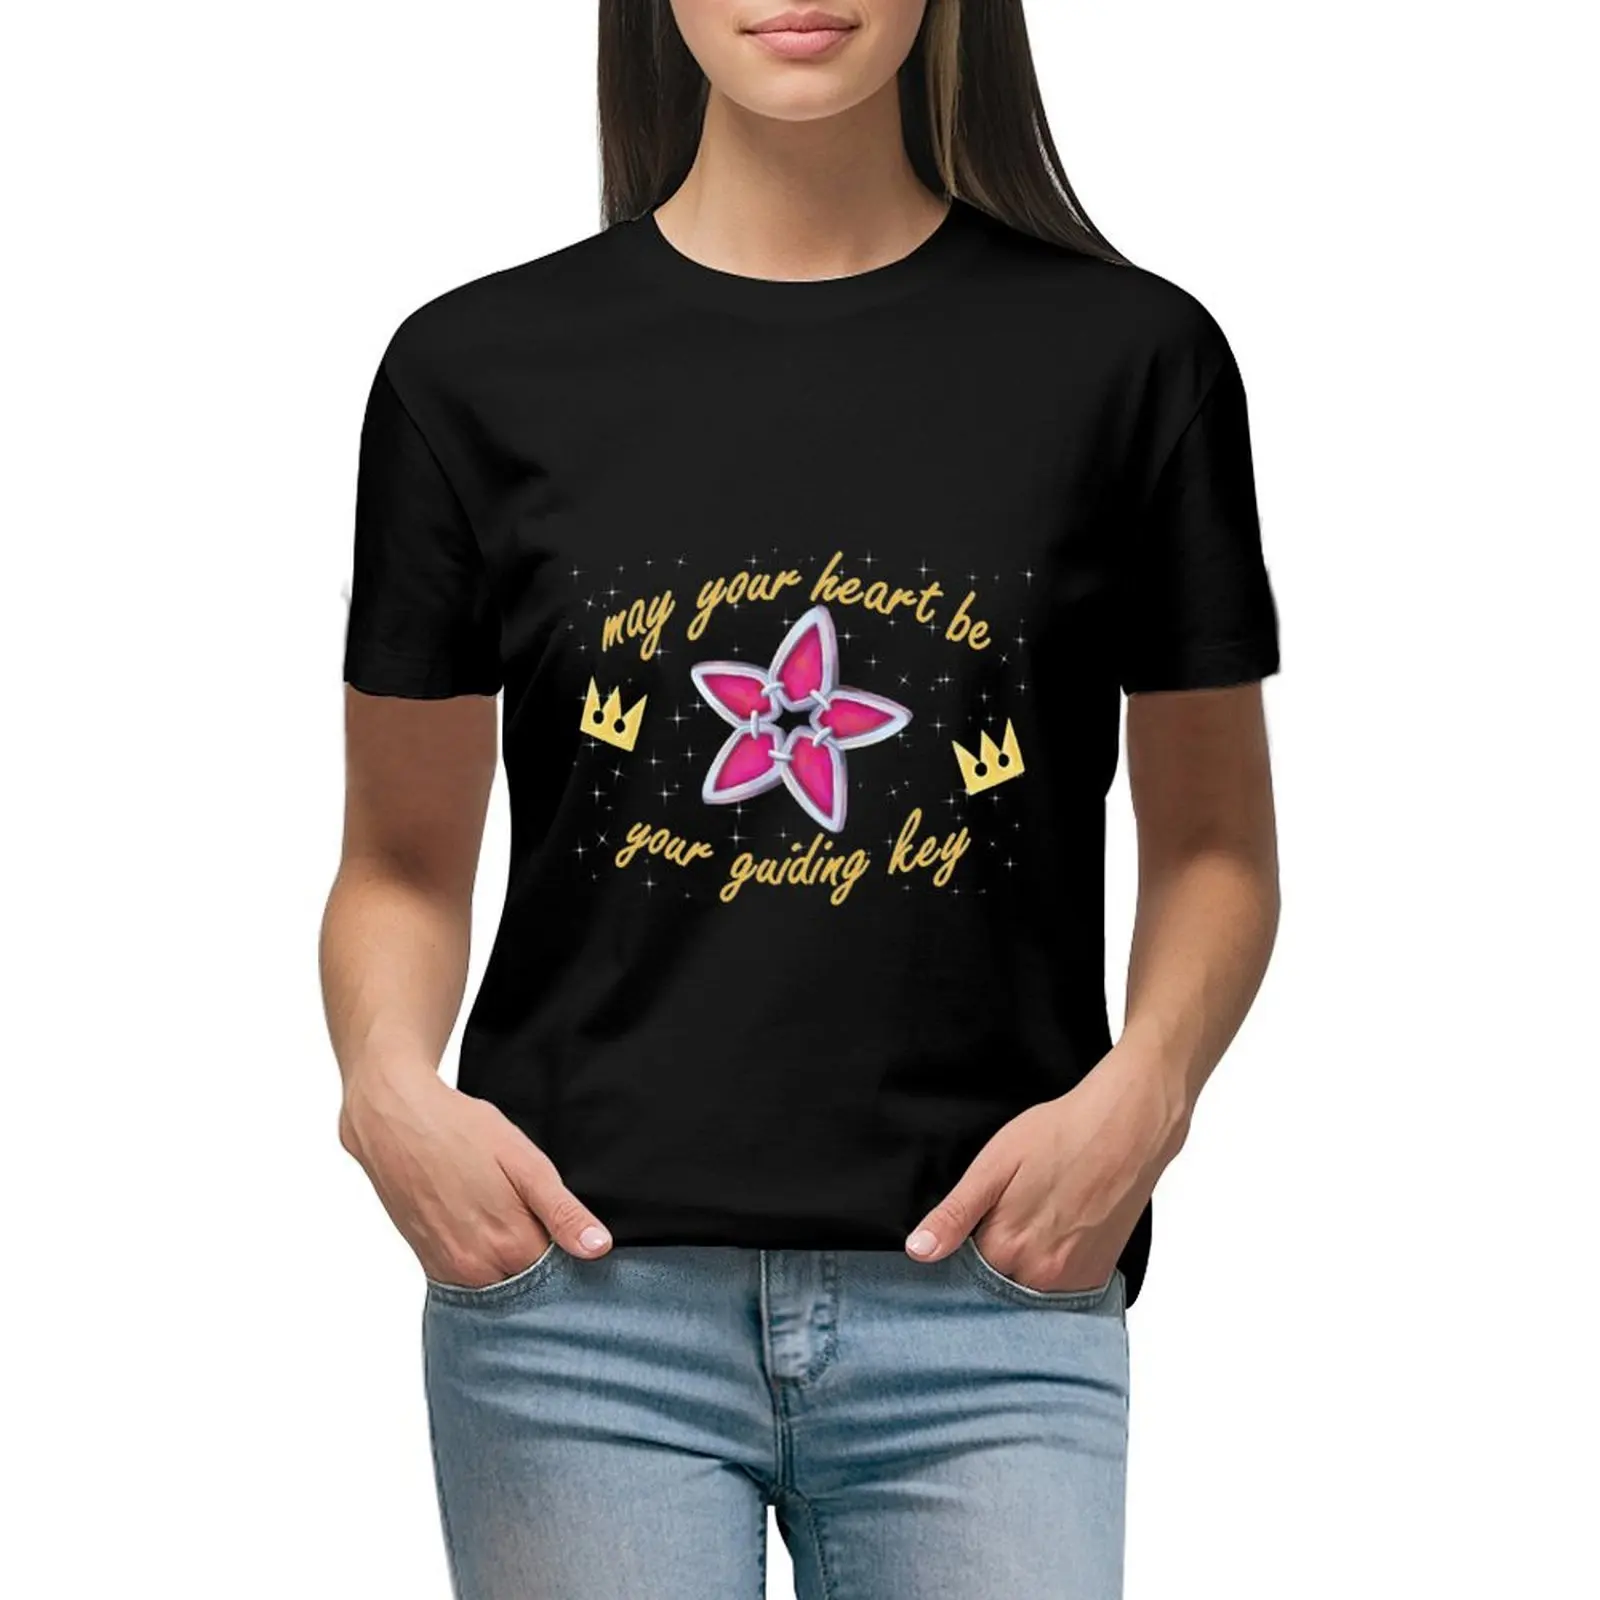 

May Your Heart Be Your Guiding Key T-shirt female Aesthetic clothing Woman T-shirts